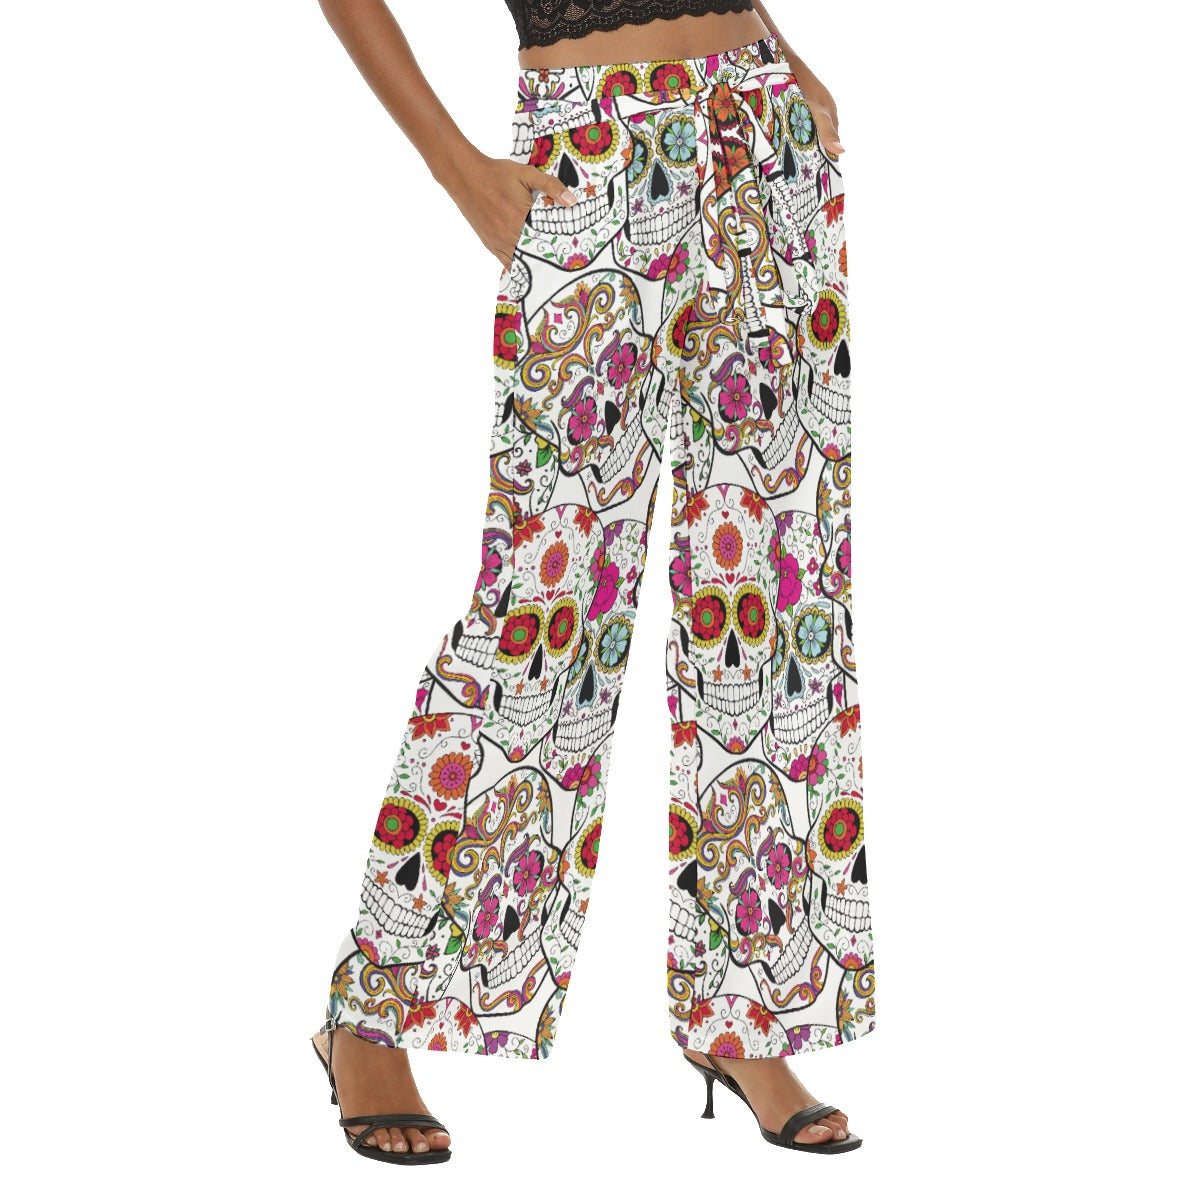 All-Over Print Women's Casual Straight-leg Pants